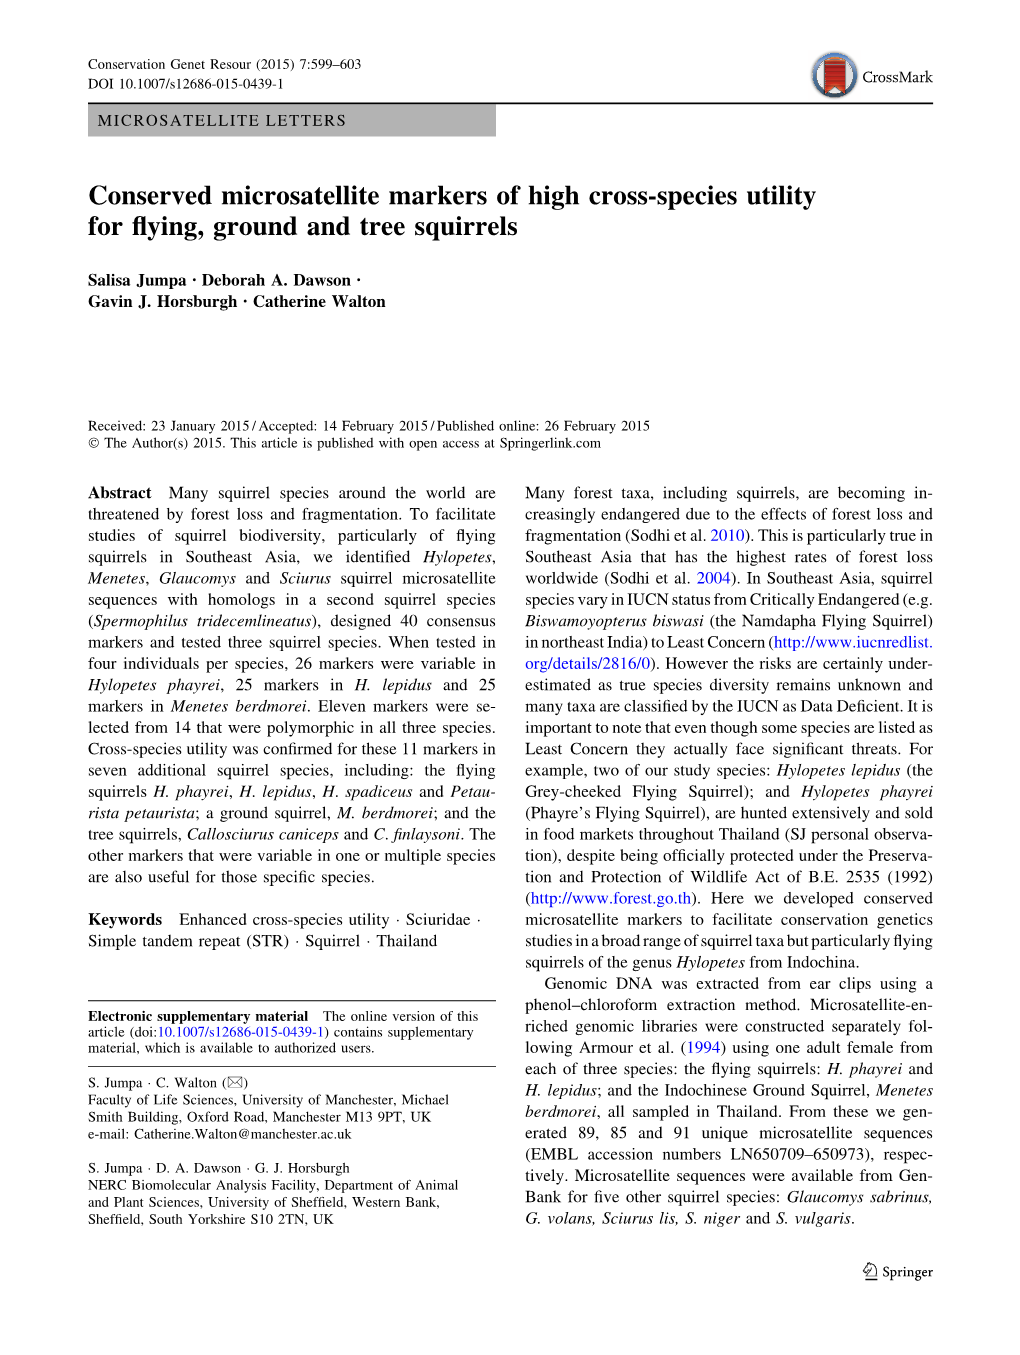 Conserved Microsatellite Markers of High Cross-Species Utility for Flying